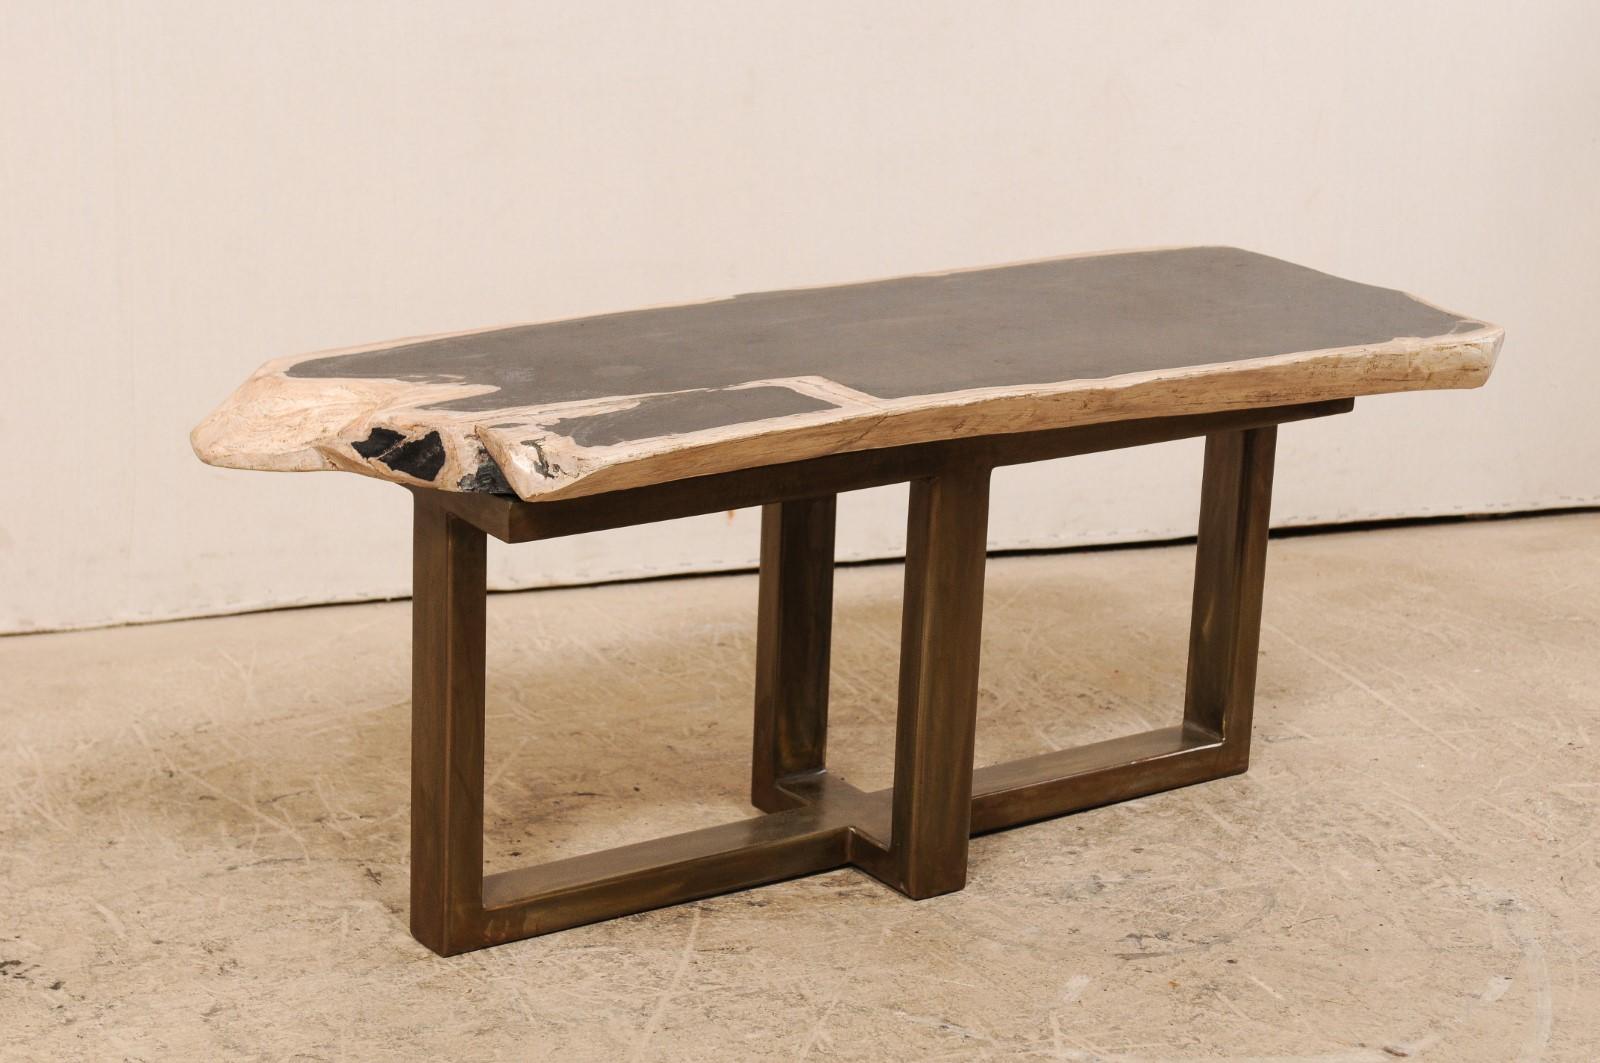 A petrified wood top modernly designed coffee table (or bench). This custom coffee table has been fashioned from a gorgeous single thick slab of smoothly polished petrified wood, with an overall rectangular-shape, just over 3.5 feet in length. This